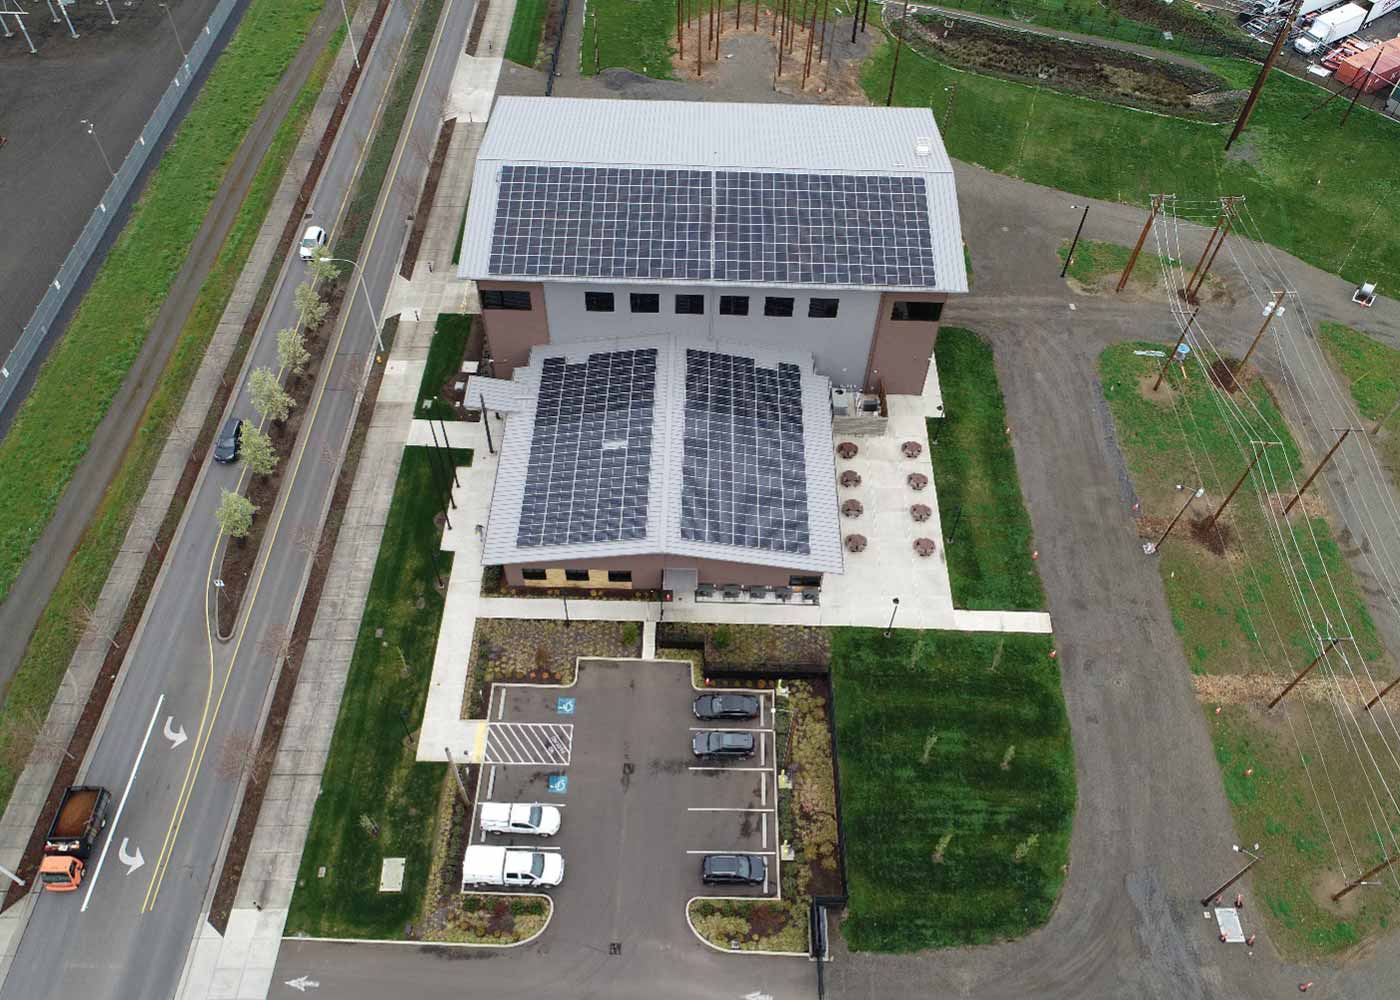 Sherwood Training Center: This facility, where linemen-in-training learn the skills of the trade, was designed and built with a roof surface large enough to generate enough solar energy to meet the power needs of the entire facility.  82kW of solar capacity were installed in 2021, with another 81kW added in December 2023.  The training center is currently a Zero Emissions facility - a building that is highly energy efficient, does not emit greenhouse gases directly from energy use, and is powered solely by clean energy - with surplus production and room for future growth included in the build.